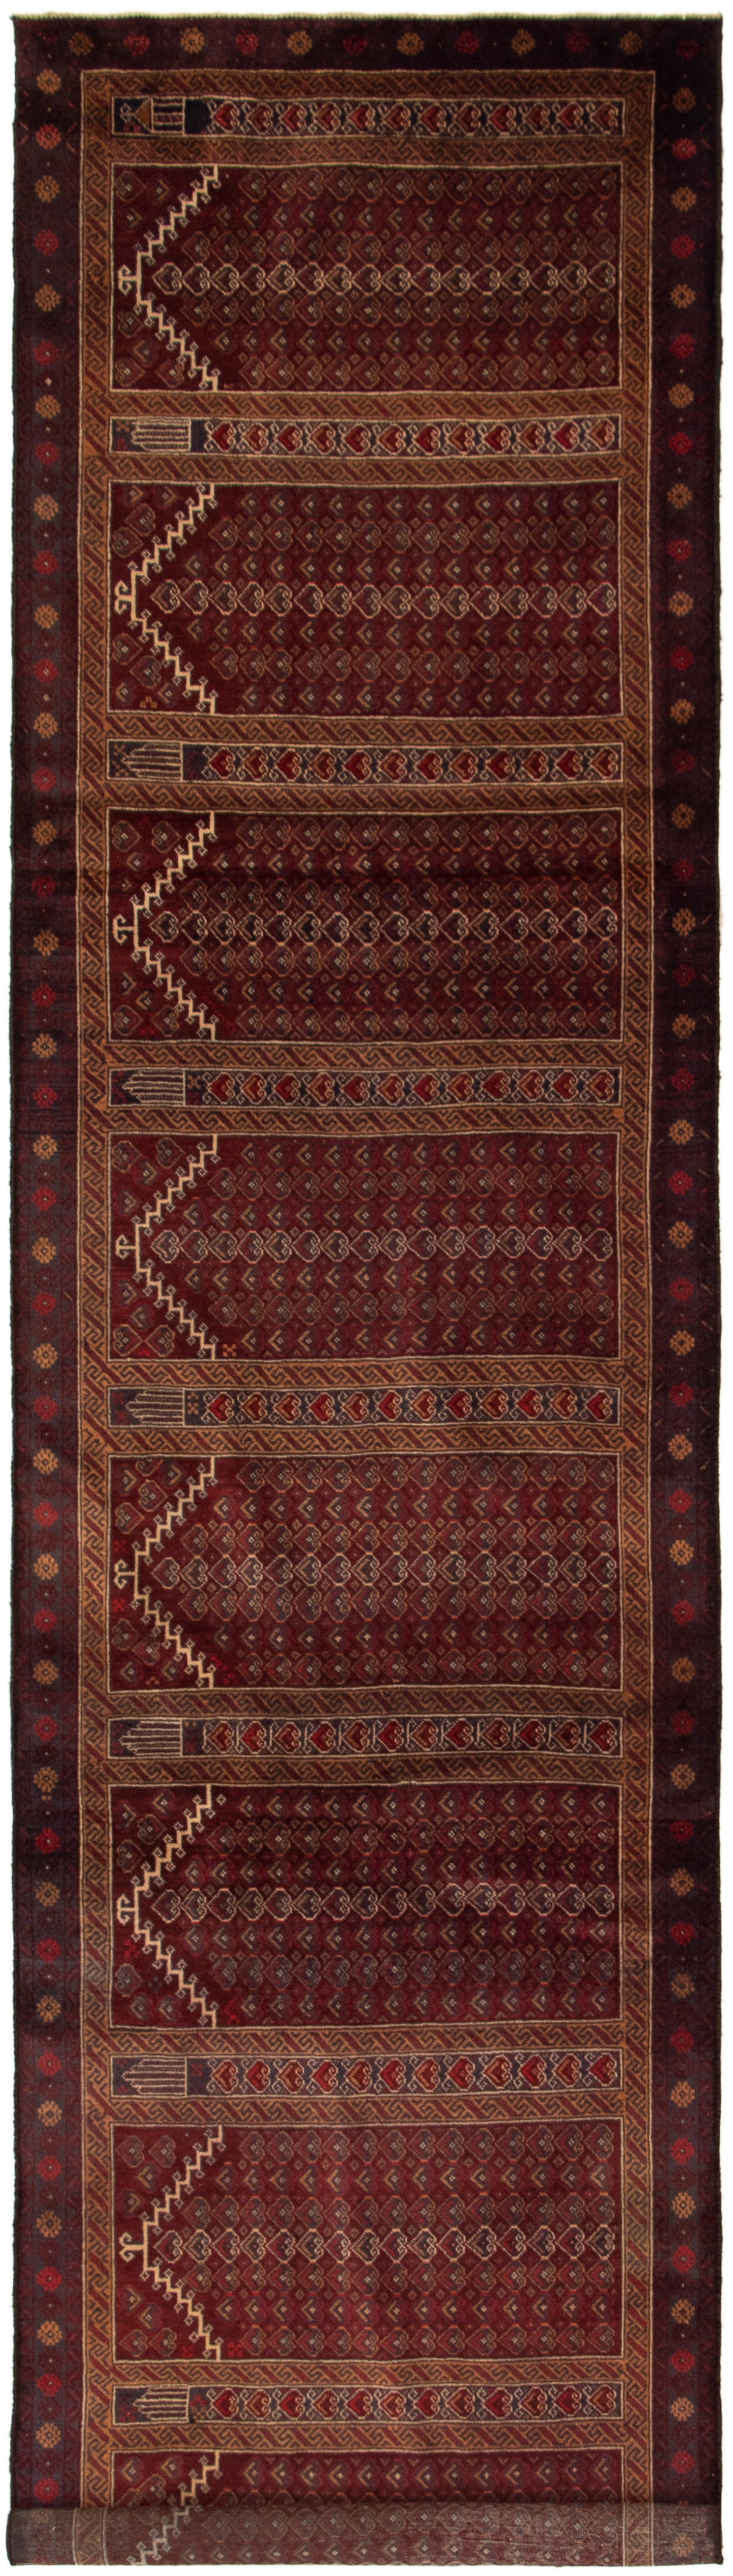 Hand-knotted Rizbaft Dark Red Wool Rug 2'11" x 12'6" Size: 2'11" x 12'6"  